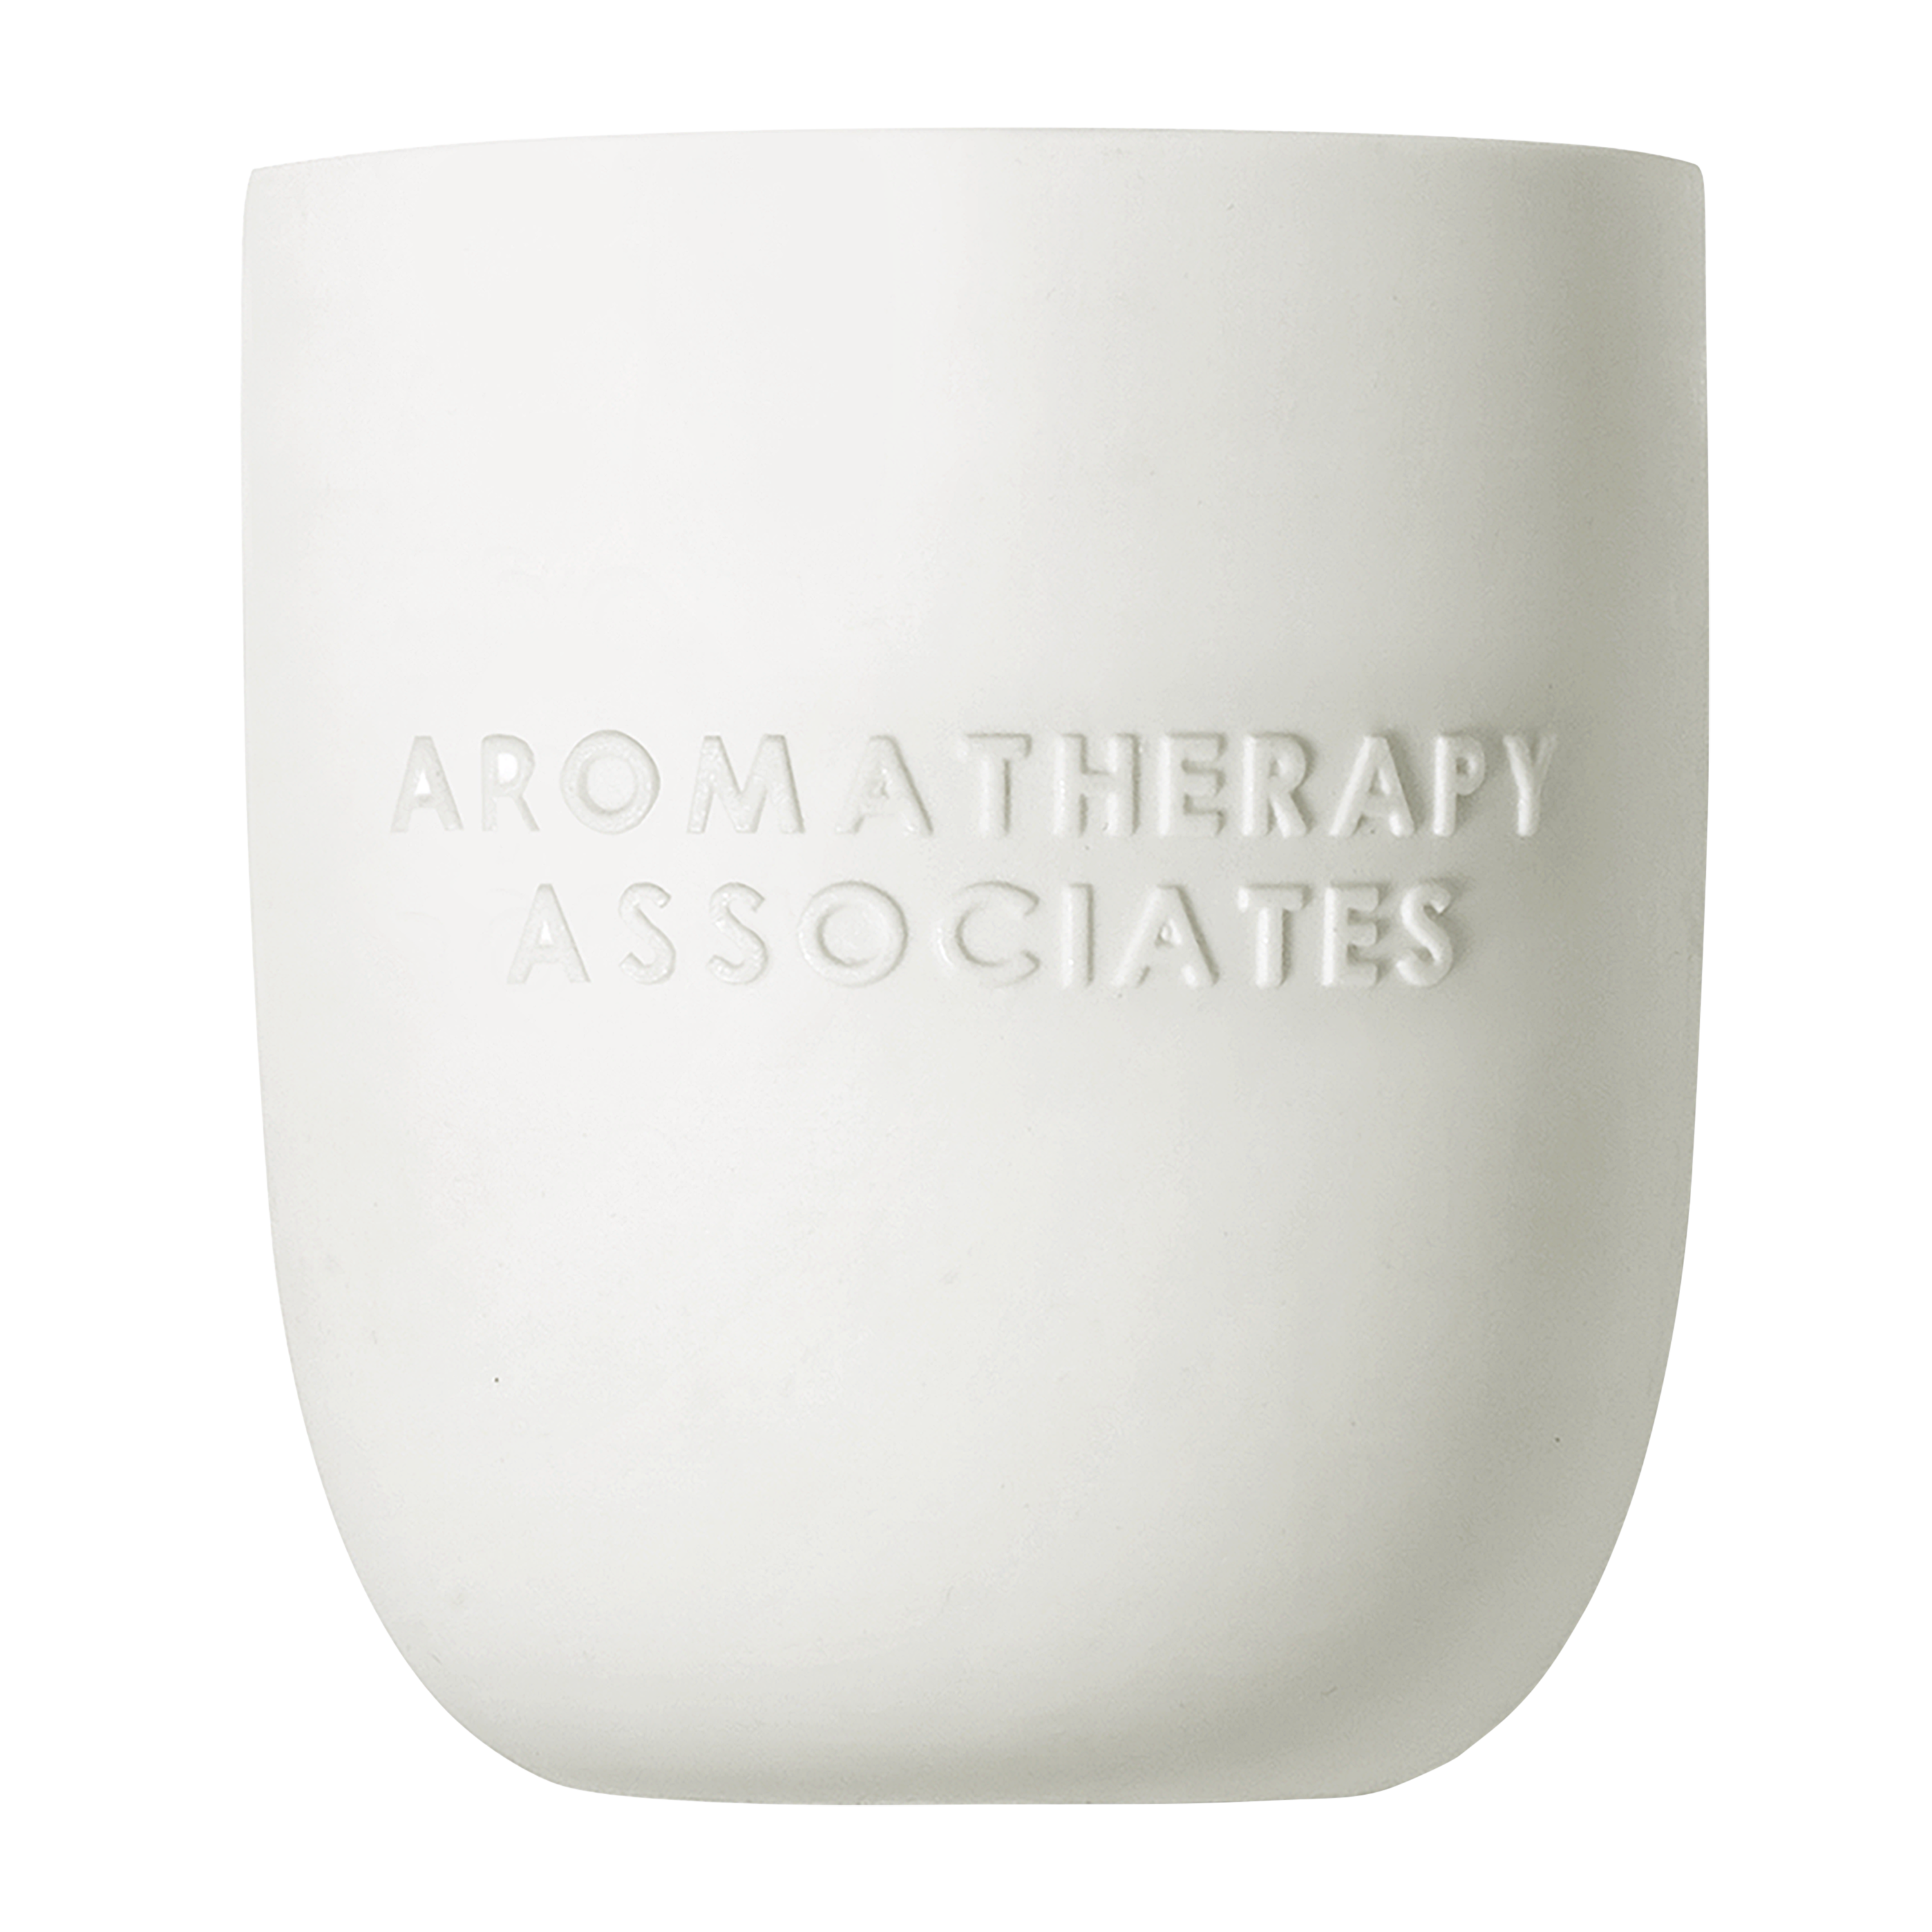 Forest Therapy Candle 200g Aromatherapy Associates